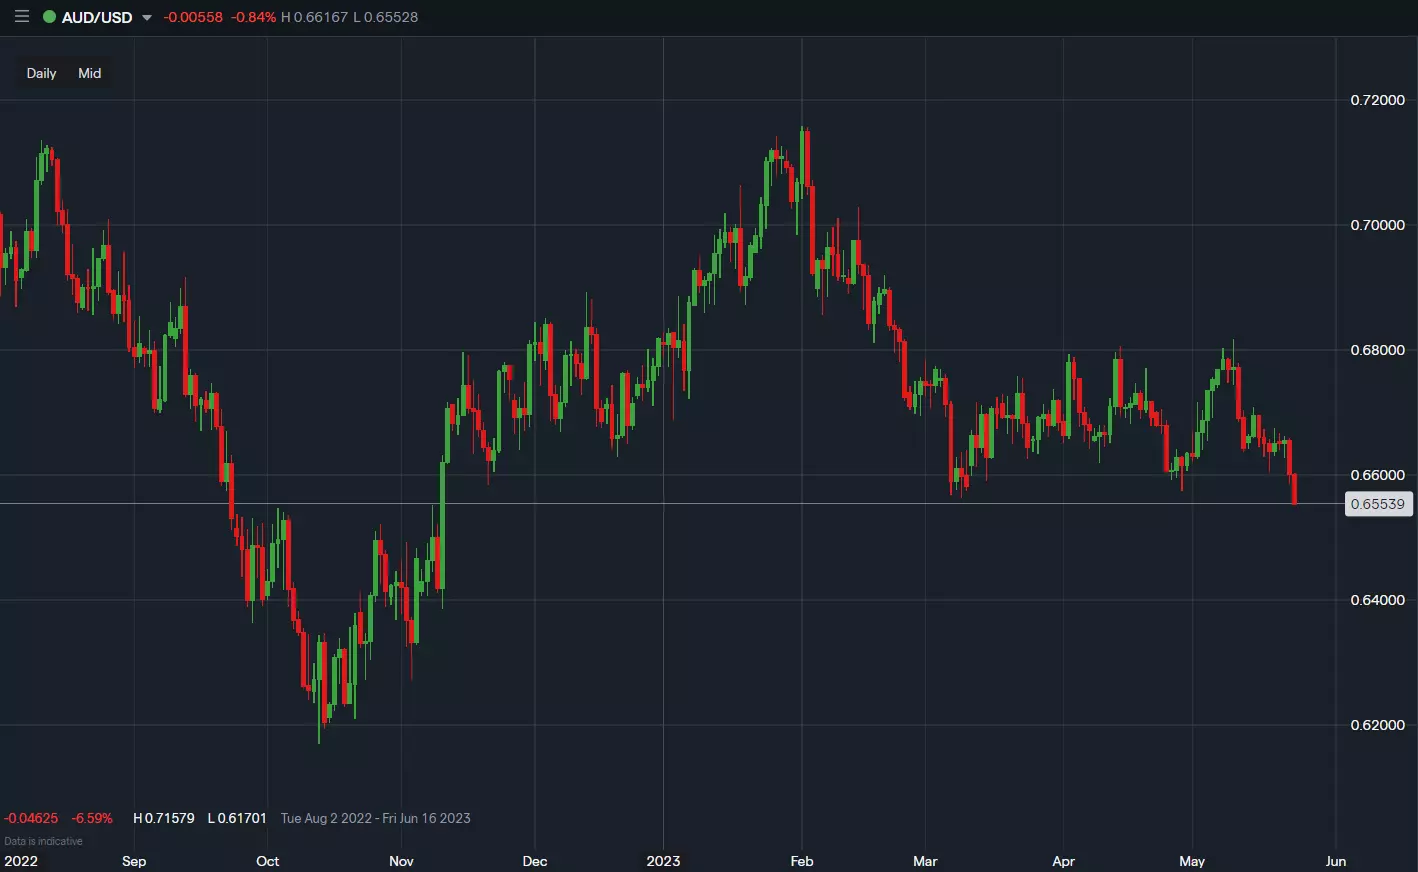 Australian dollar (AUD/USD) prices for the last year showing AUD/USD moving to recent lows under 0.6600.